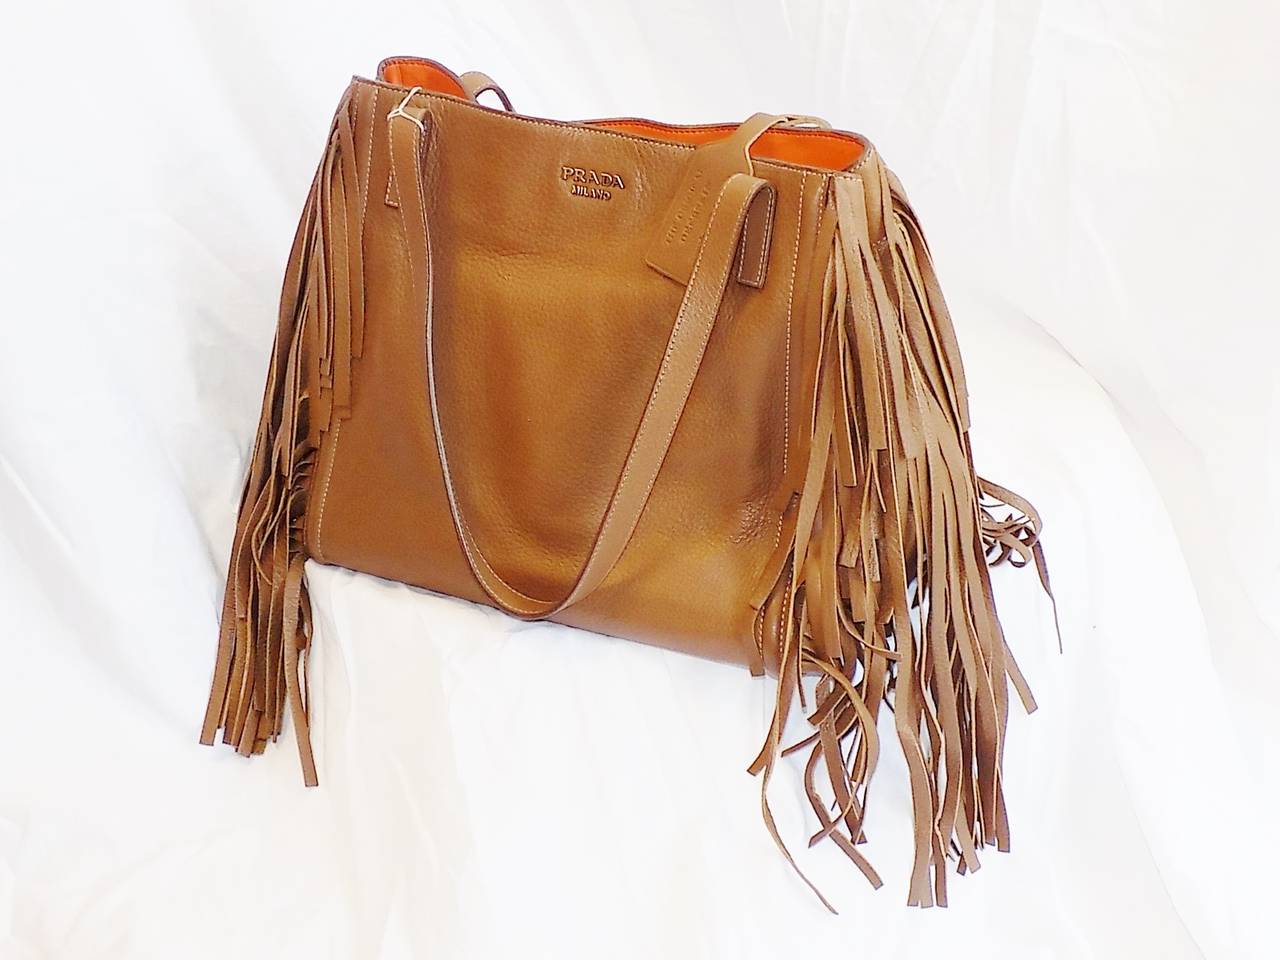 New with all authenticity cards beautiful Prada tote bag.  Deer skin Fringed Shoulder bag with supple orange leather lining. Double shoulder strap. Snap closure . Featuring gold tone vintage hardware and plenty of zip pockets as well as phone and